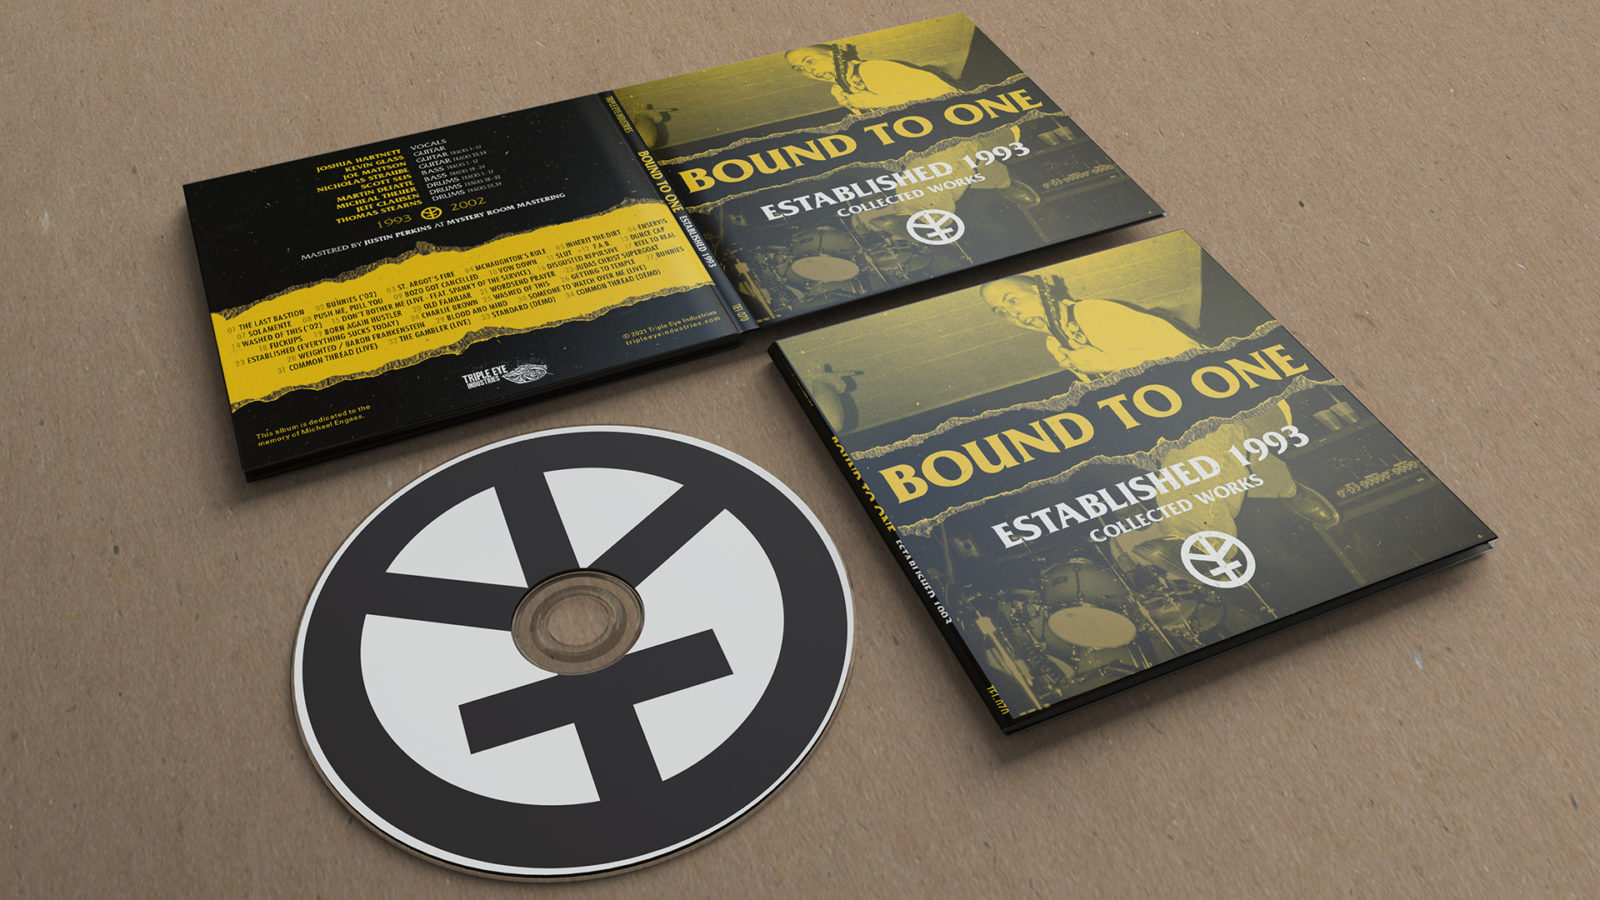 Bound to One – Established 1993: Collected Works CD Layout